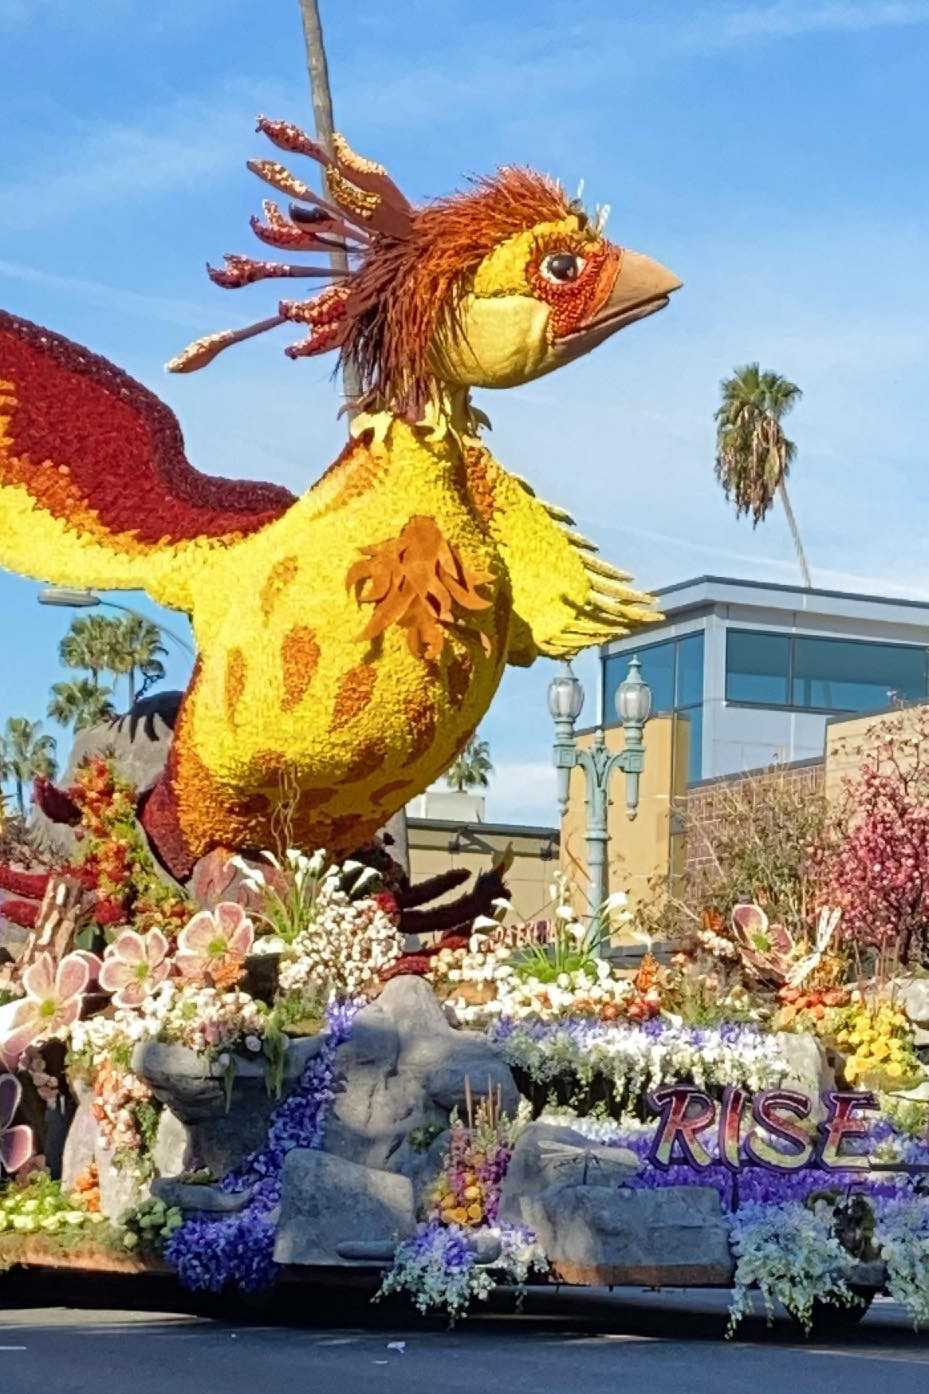 Rose Parade floats embody hope for the 2020 Tournament of Roses